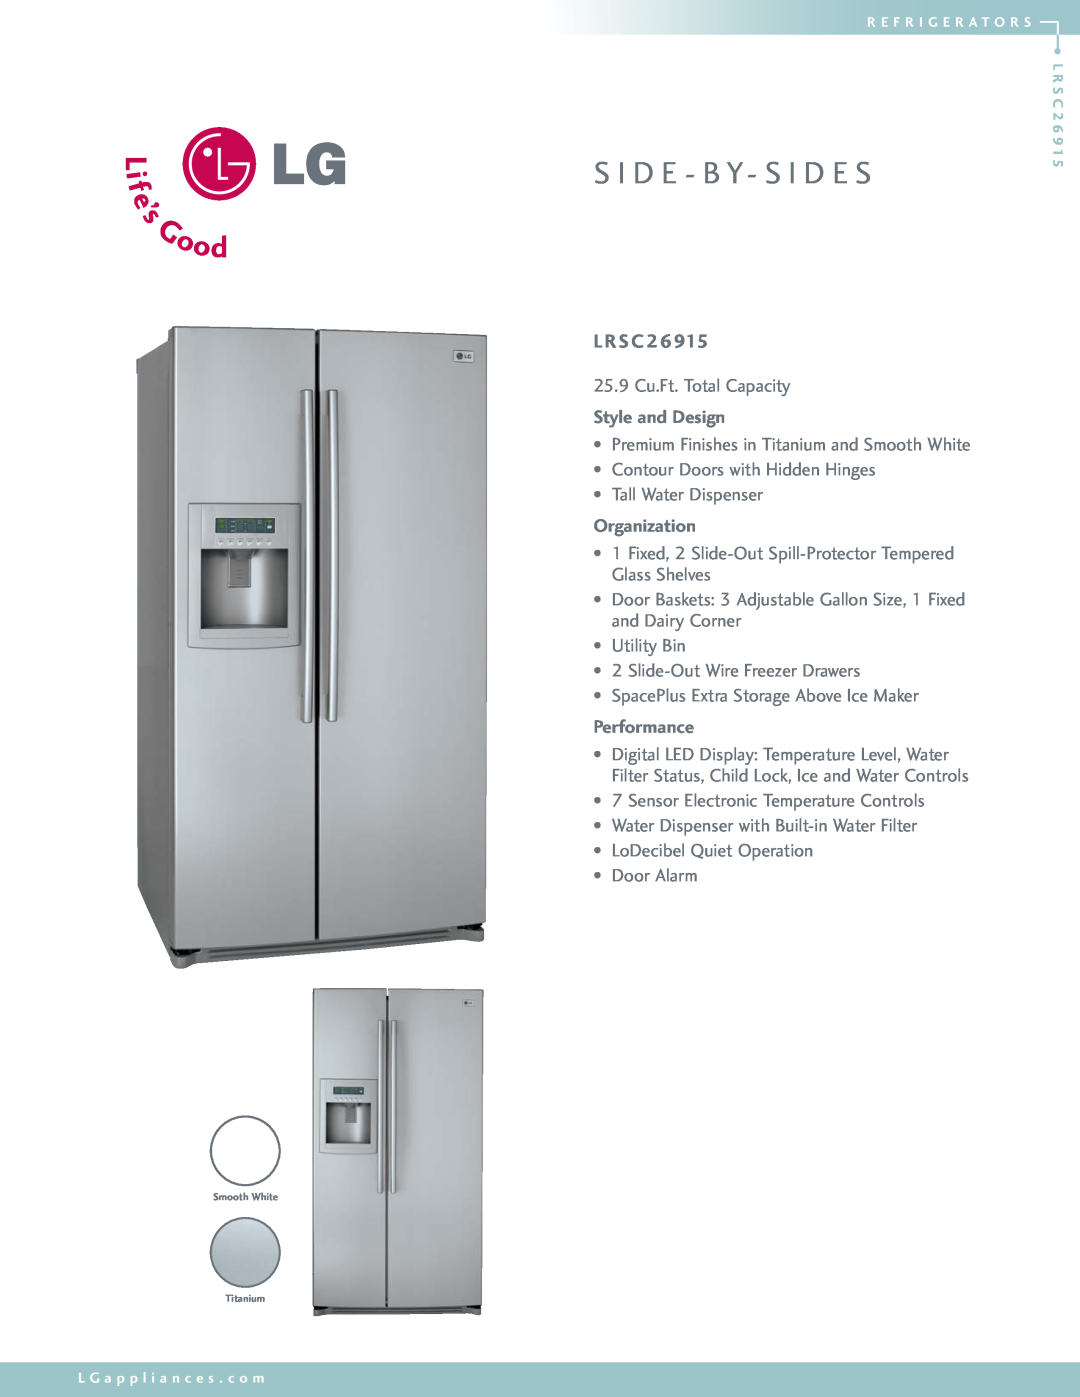 LG Electronics LRSC26915 manual L Rs C, S I D E - B Y- S I D E S, Style and Design, Organization, Performance 